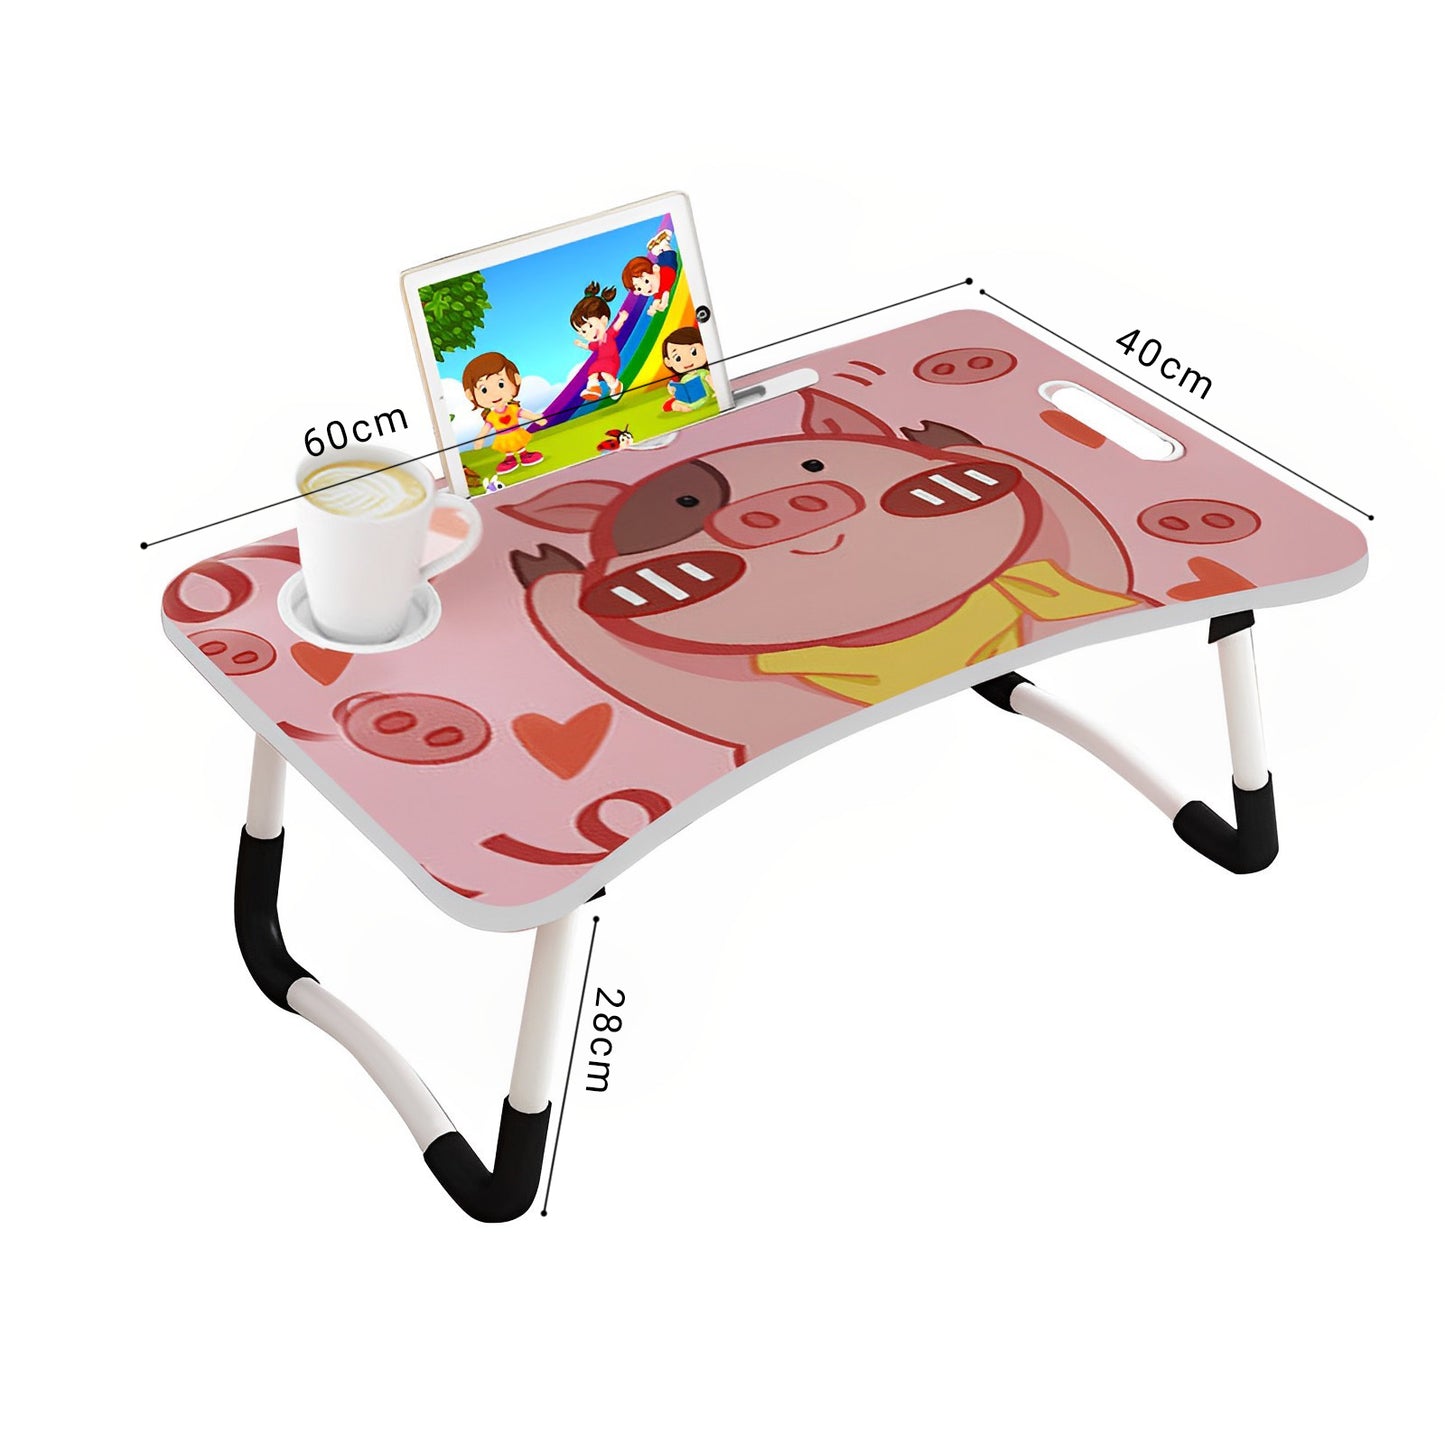 SOGA 2X Cute Pig Design Portable Bed Table Adjustable Foldable Bed Sofa Study Table Laptop Mini Desk with Drawer and Cup Slot Home Decor LUZ-BedTableM662X2